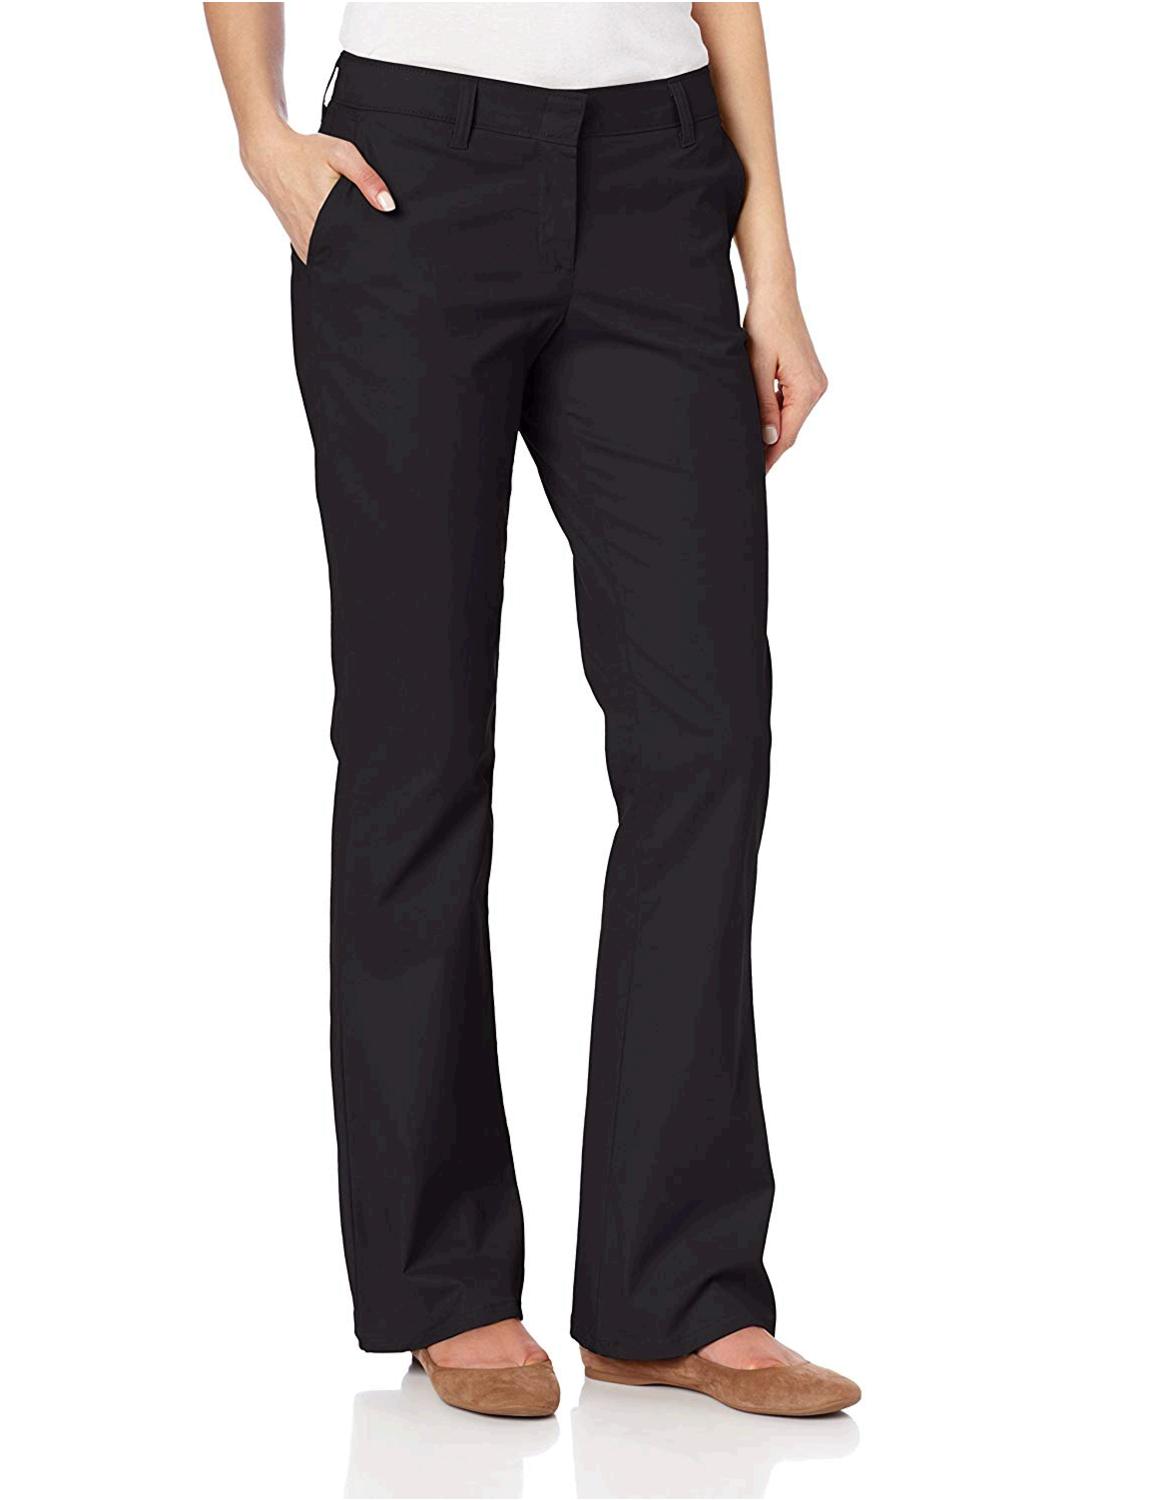 dickies Women's Flat Front Stretch Twill Pant Slim Fit Bootcut,, Black ...